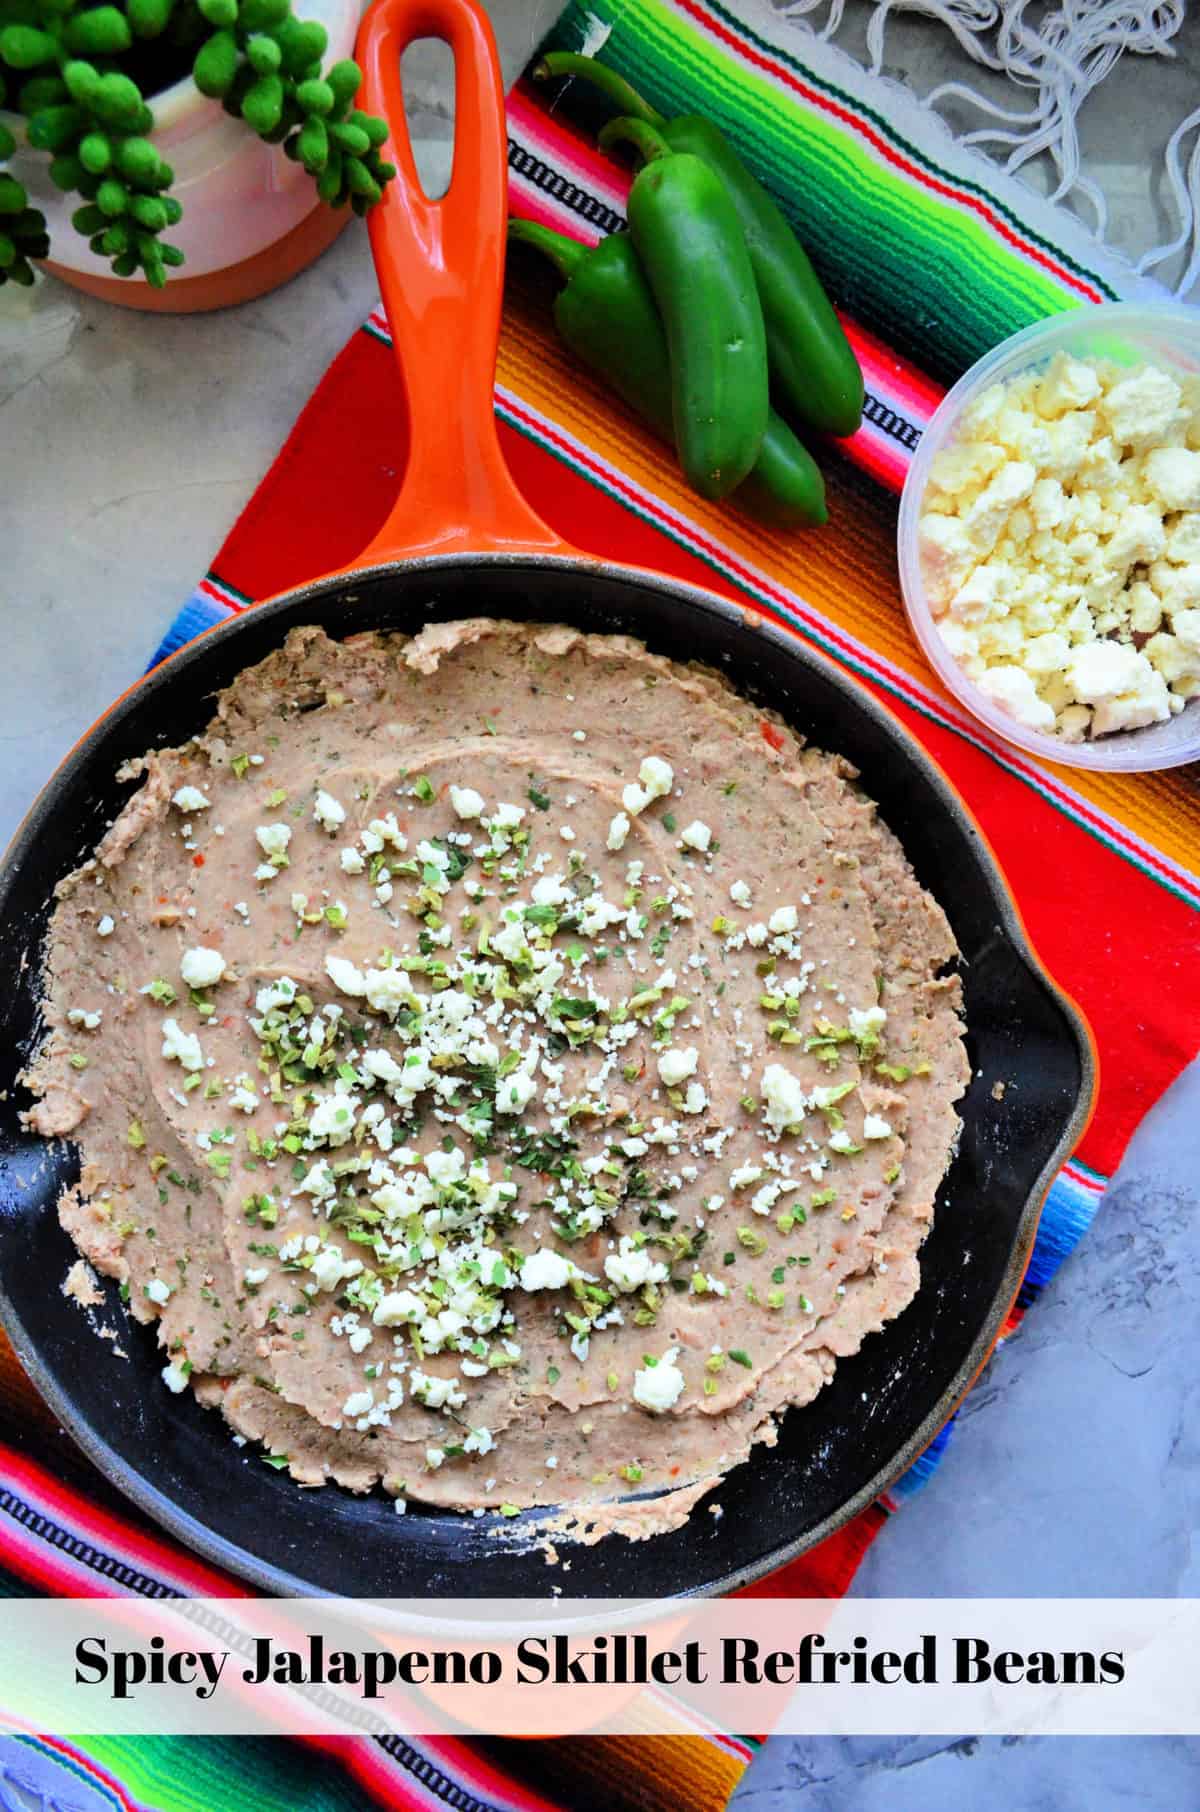 Skillet filled with refried beans topped with chopped herbs and cheese crumbles with title text.